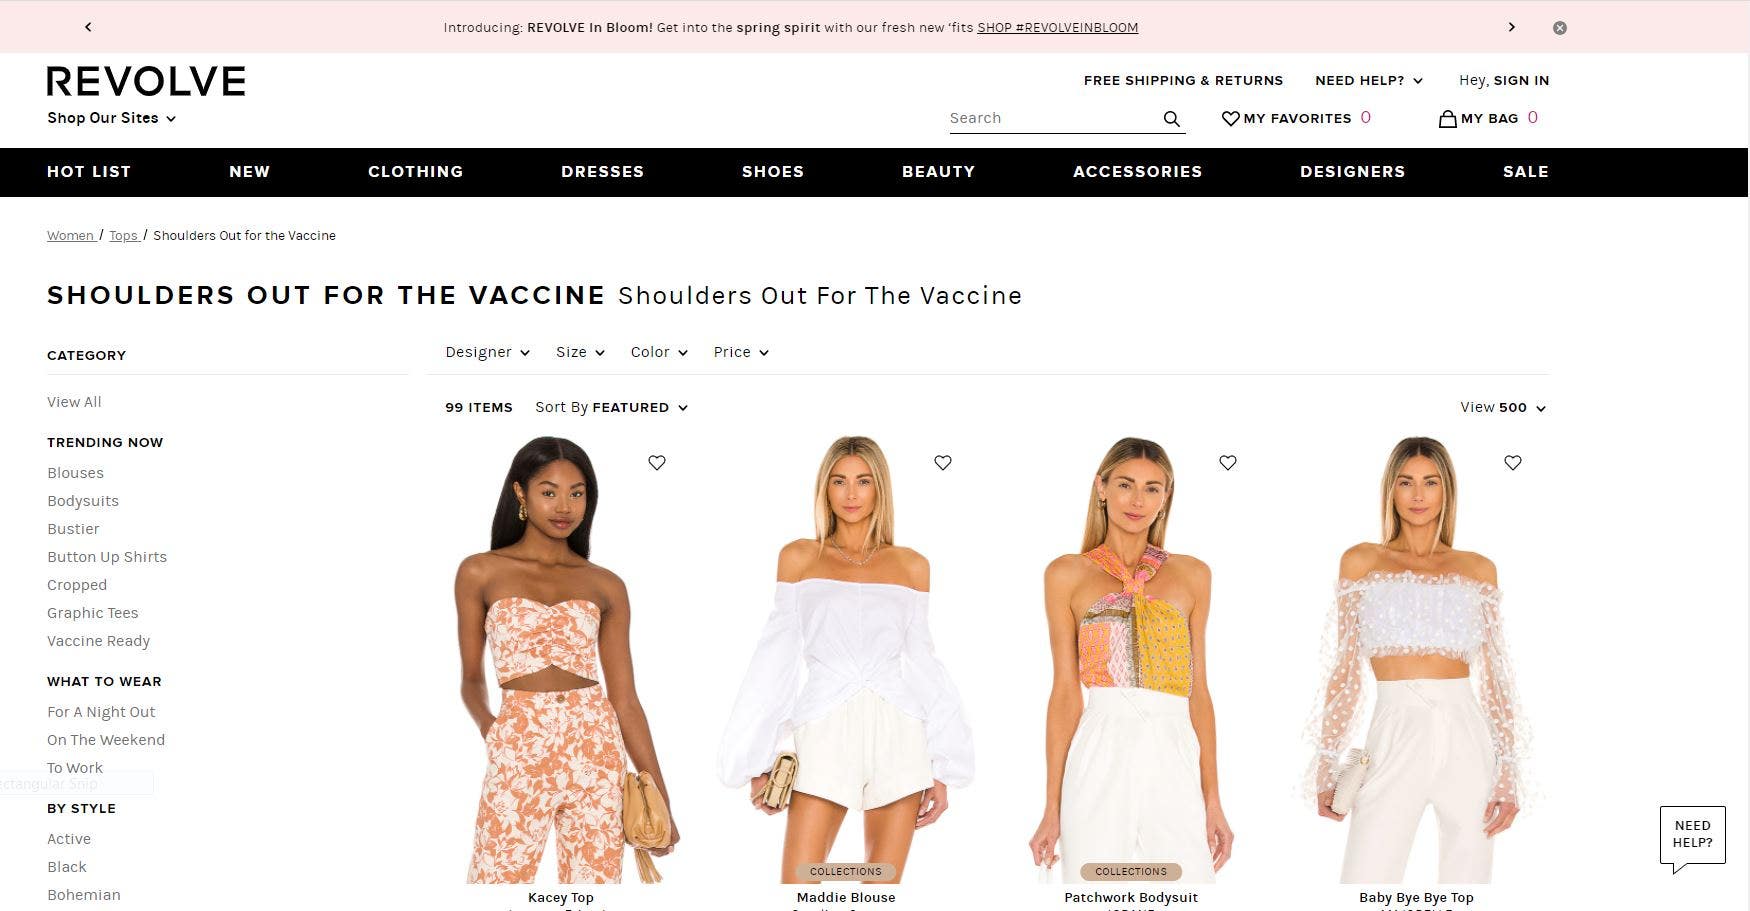 'Vaccine ready': Fashion brand Revolve mocked for shirt section